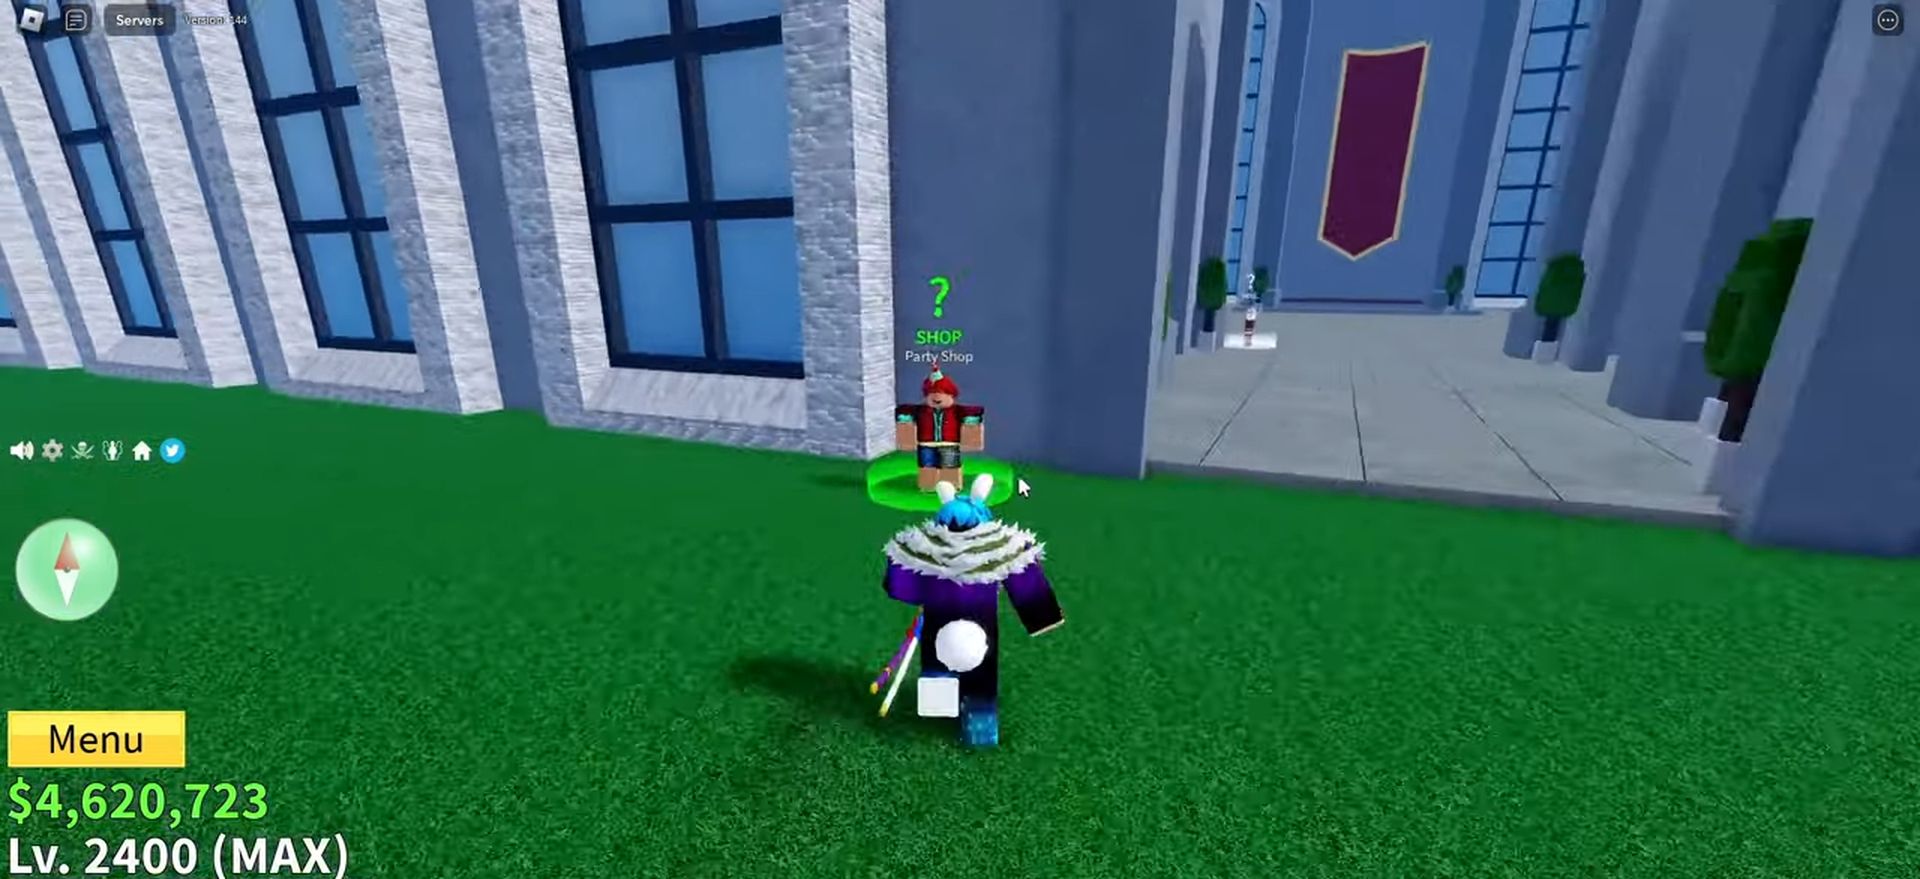 Where is party shop in Blox Fruits: NPC can be found just outside of the castle on the sea